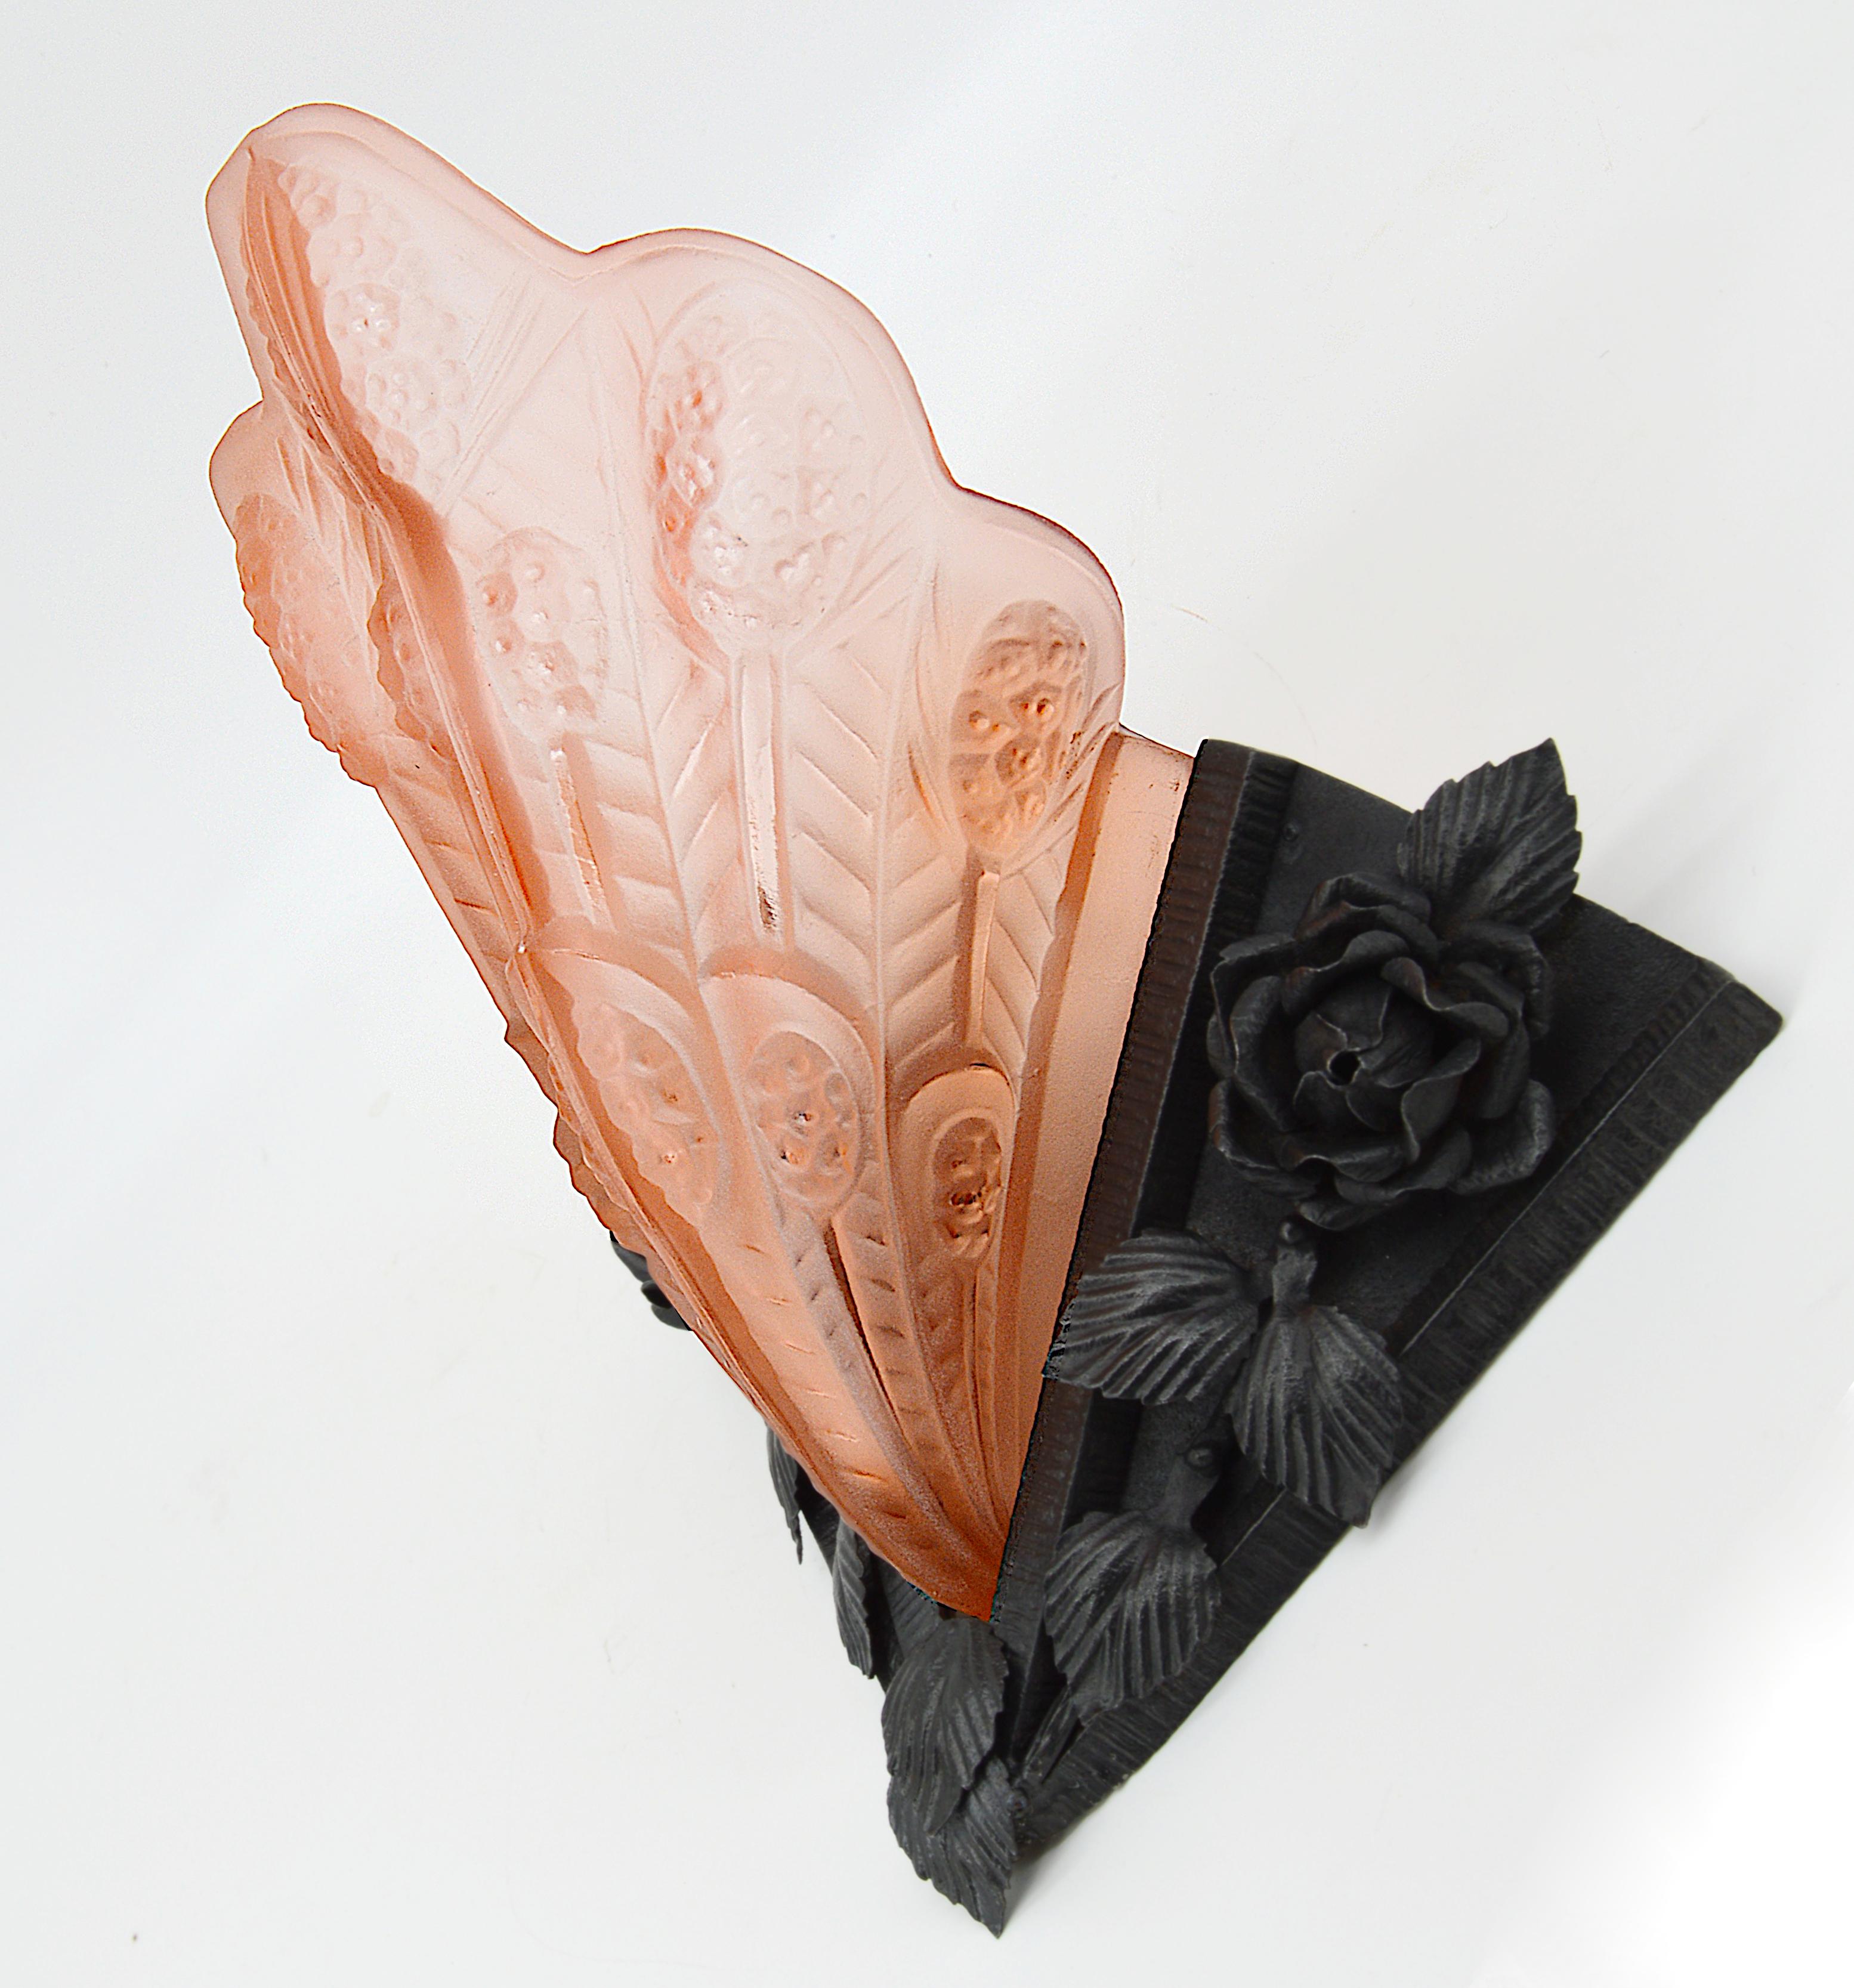 Molded Jean Noverdy French Art Deco Wall Sconce, 1925 For Sale